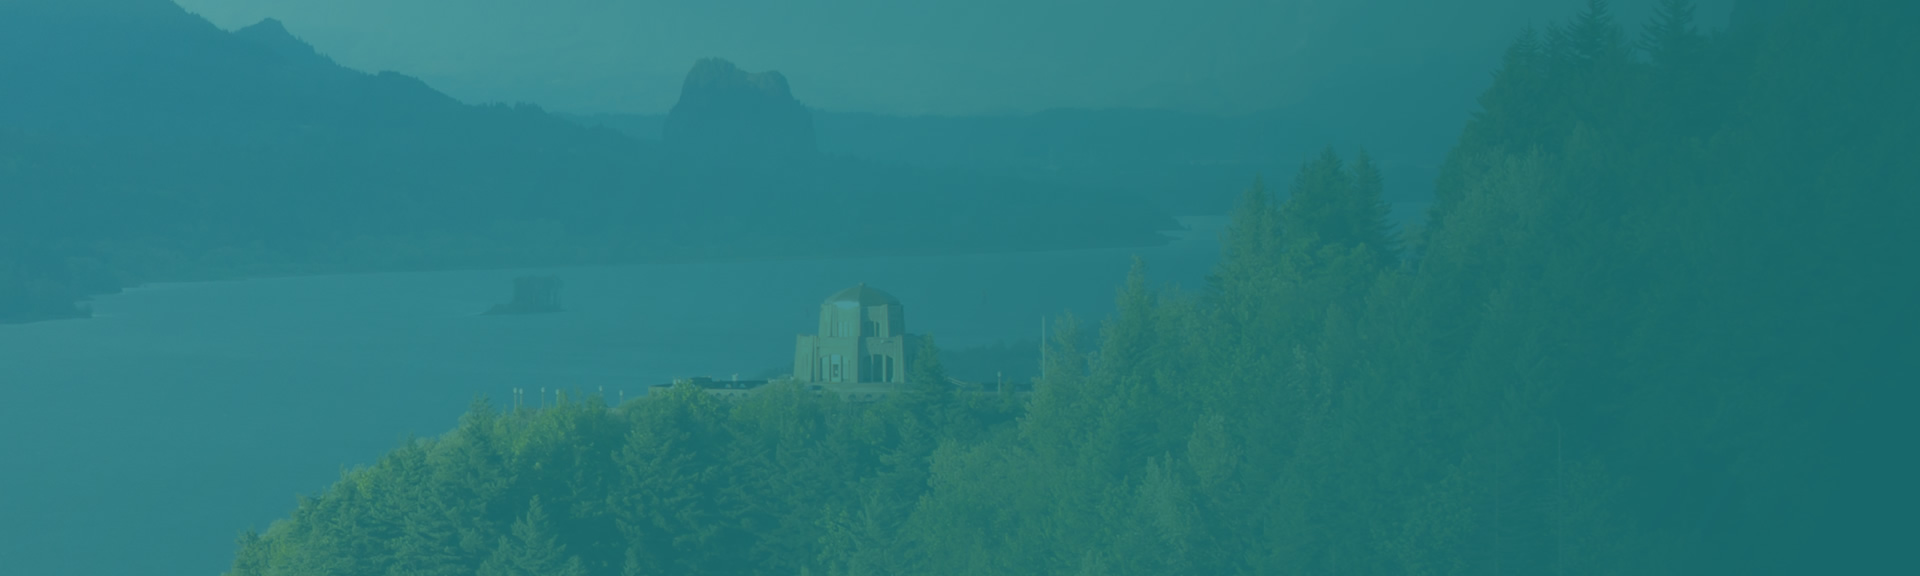 Pay Per Click Advertising Services - Columbia River Gorge - Crown Point - Background Image | Digital C4